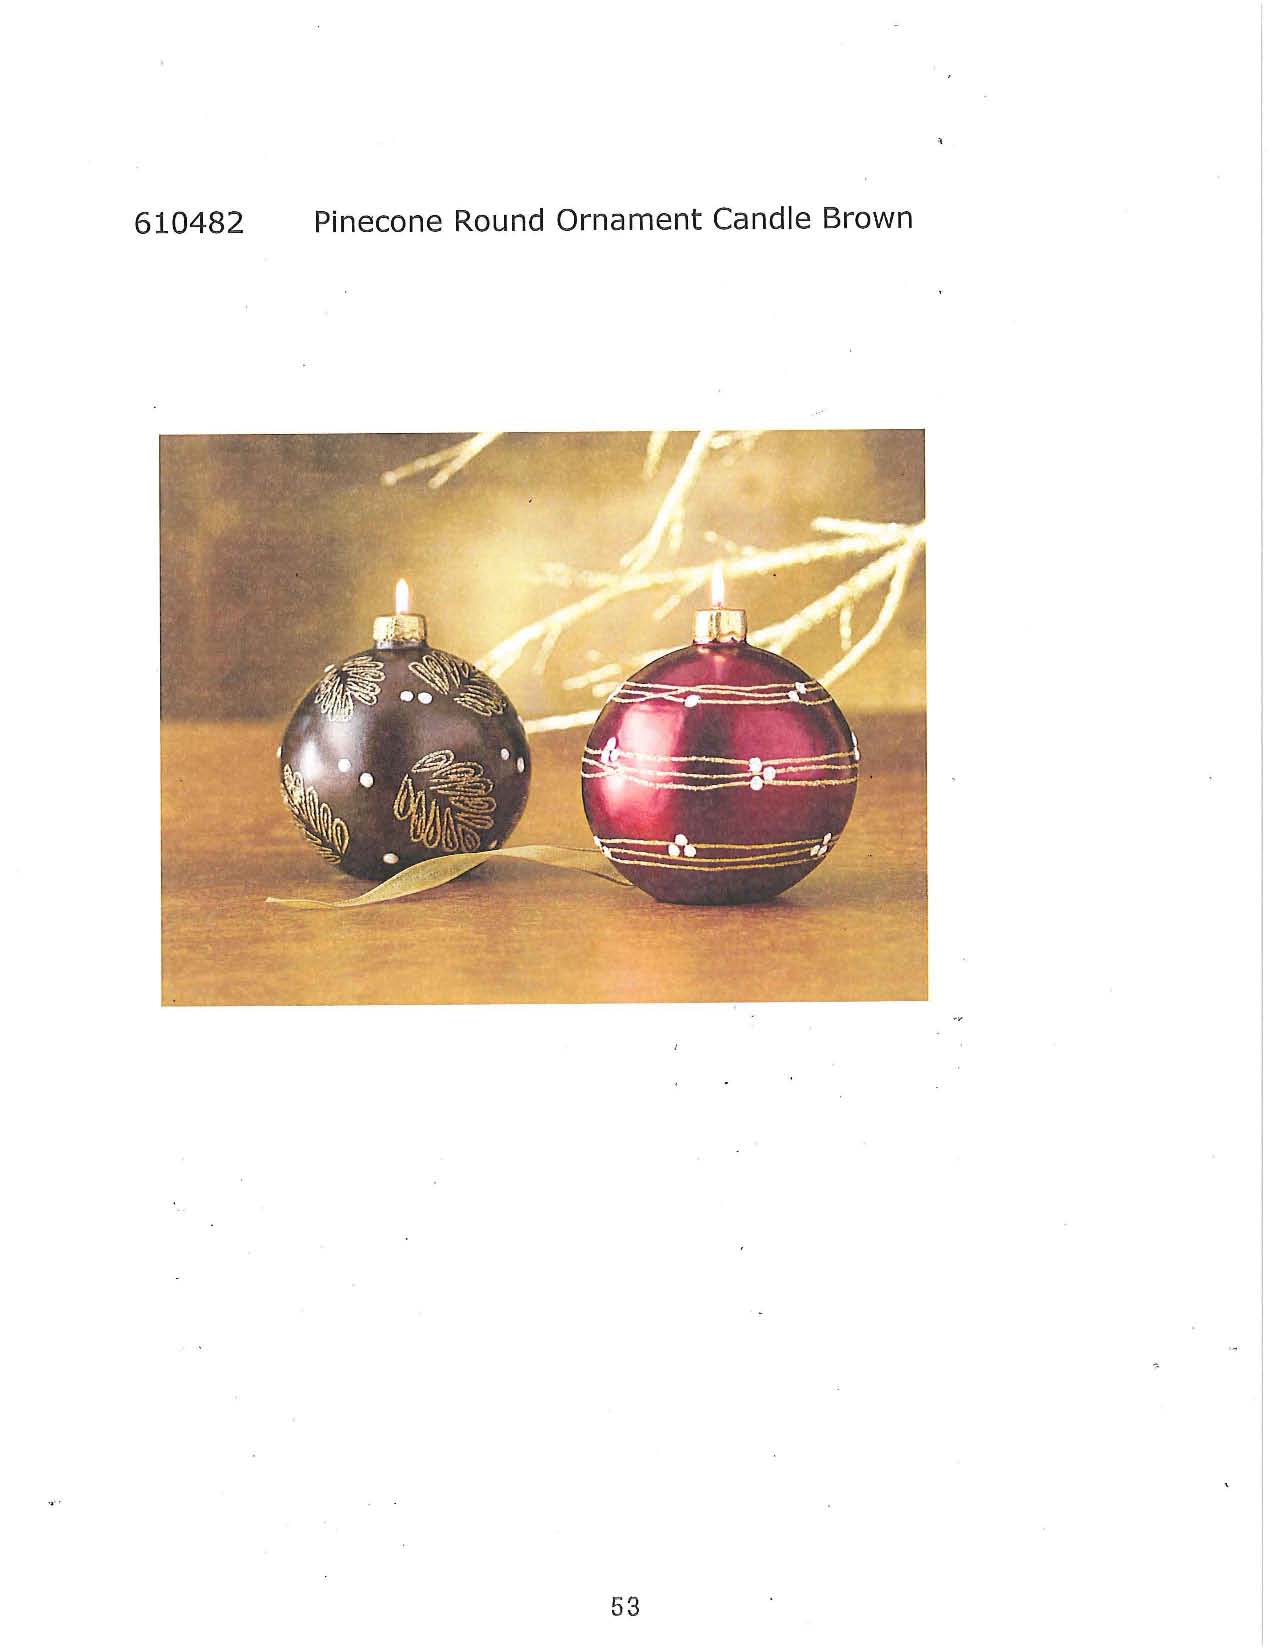 Pinecone Round Ornament Candle - Brown